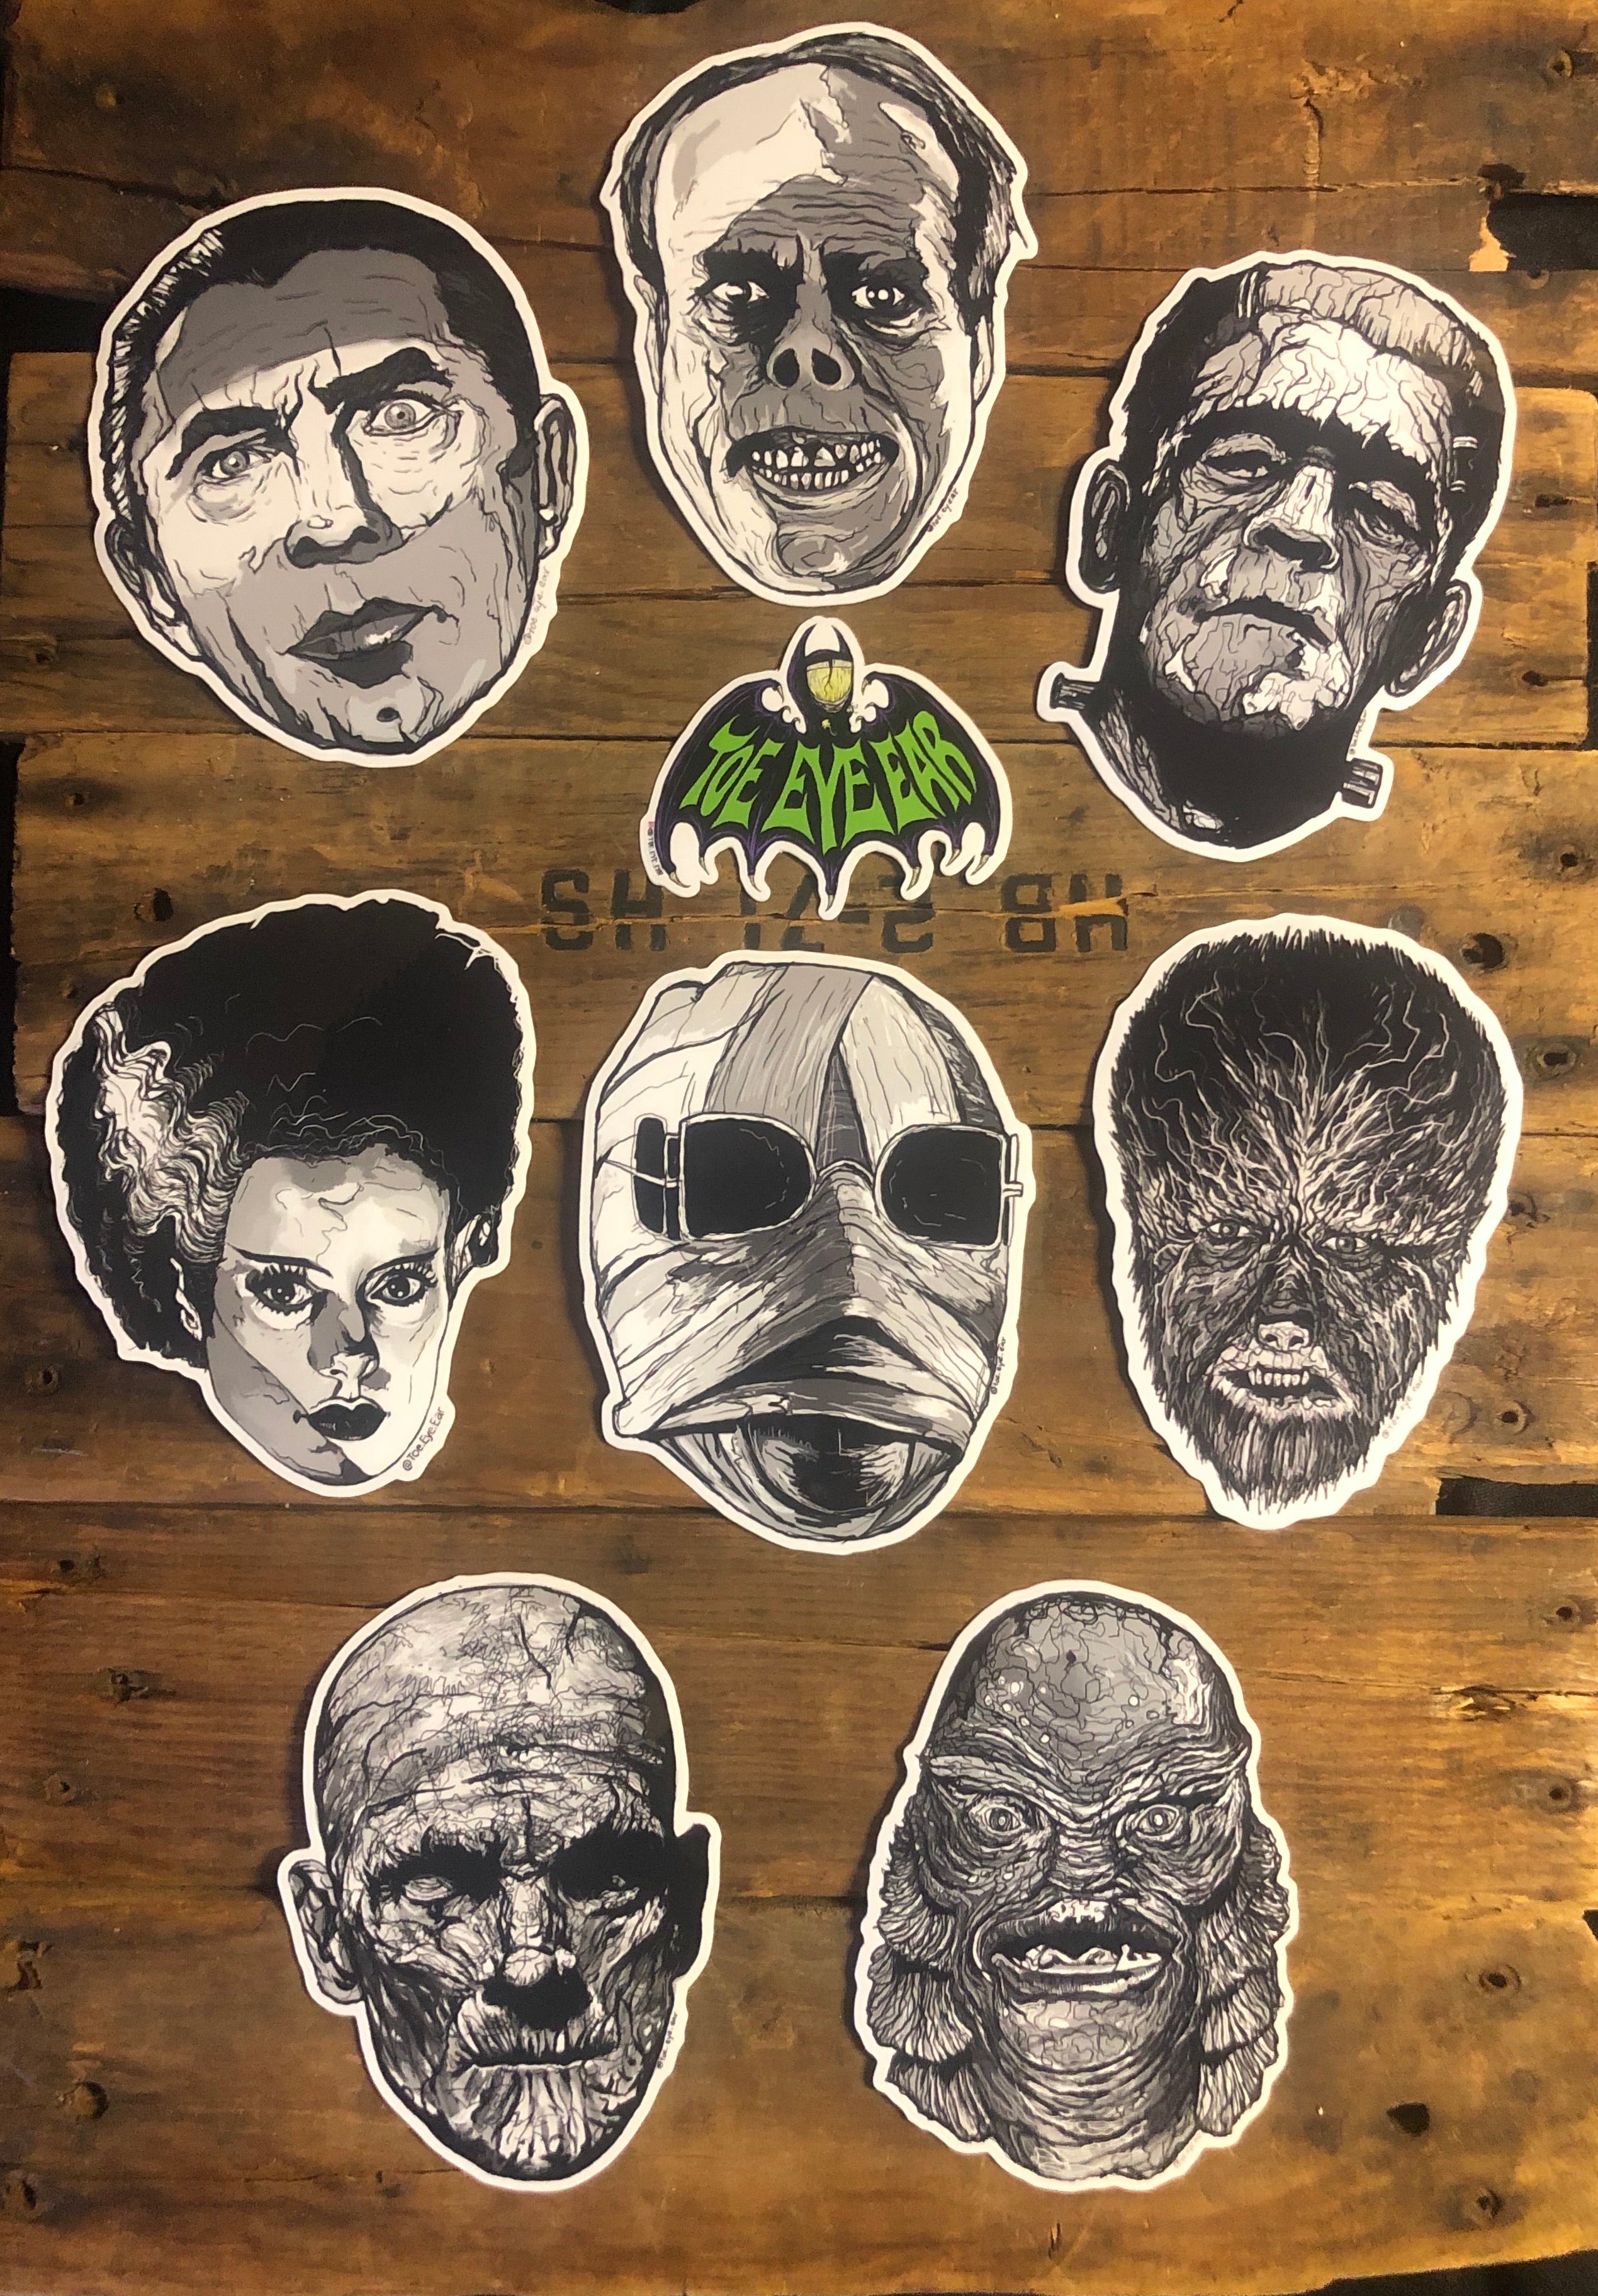 classic horror monsters